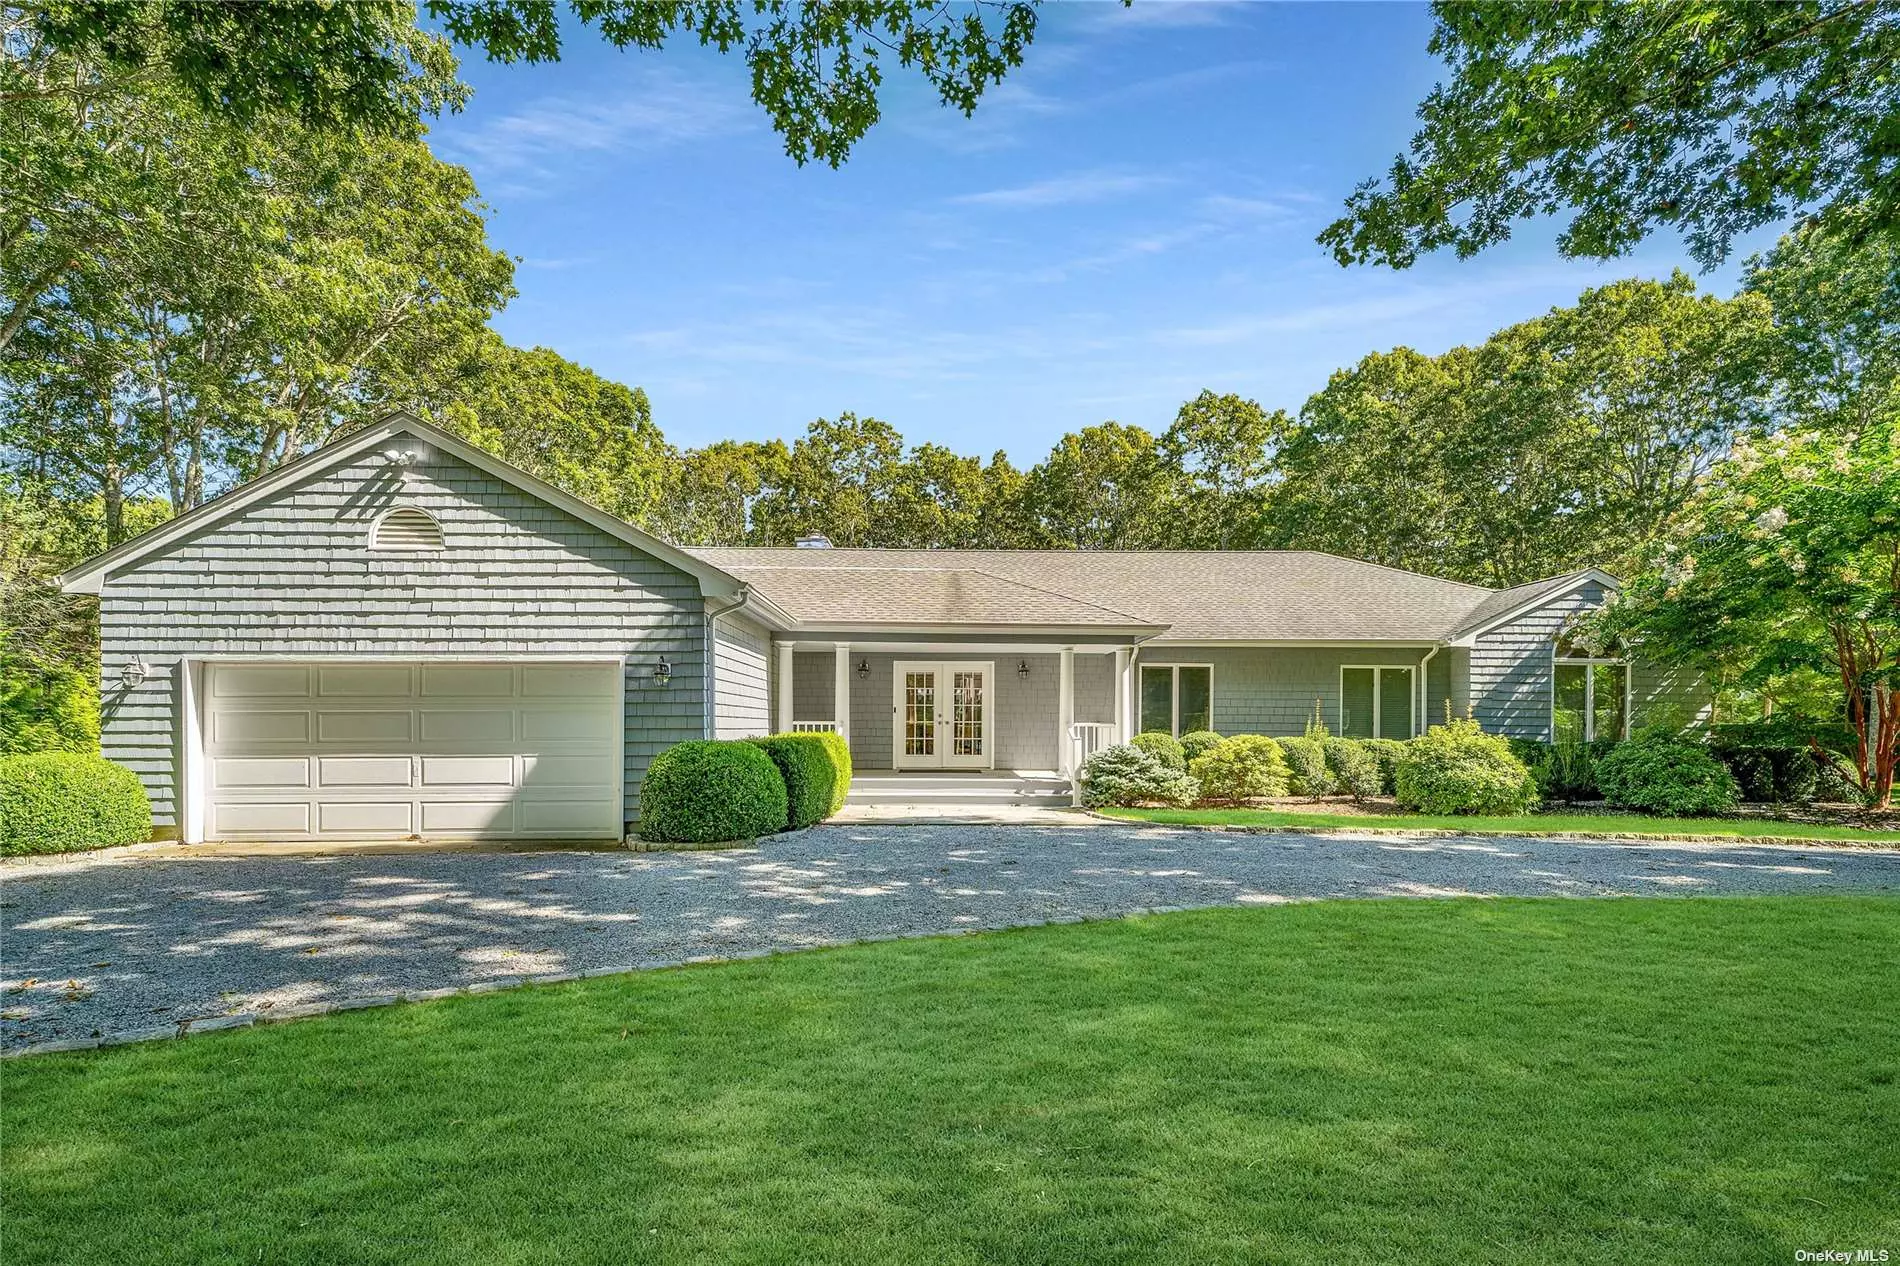 Pull up to a charming four bedroom house in Quogue. There is nothing to be done, it is move-in ready. There is a very private yard with lots of room to garden and a heated pool with beautiful decking all around. Spend your Winter and Summer months in quiet luxury.